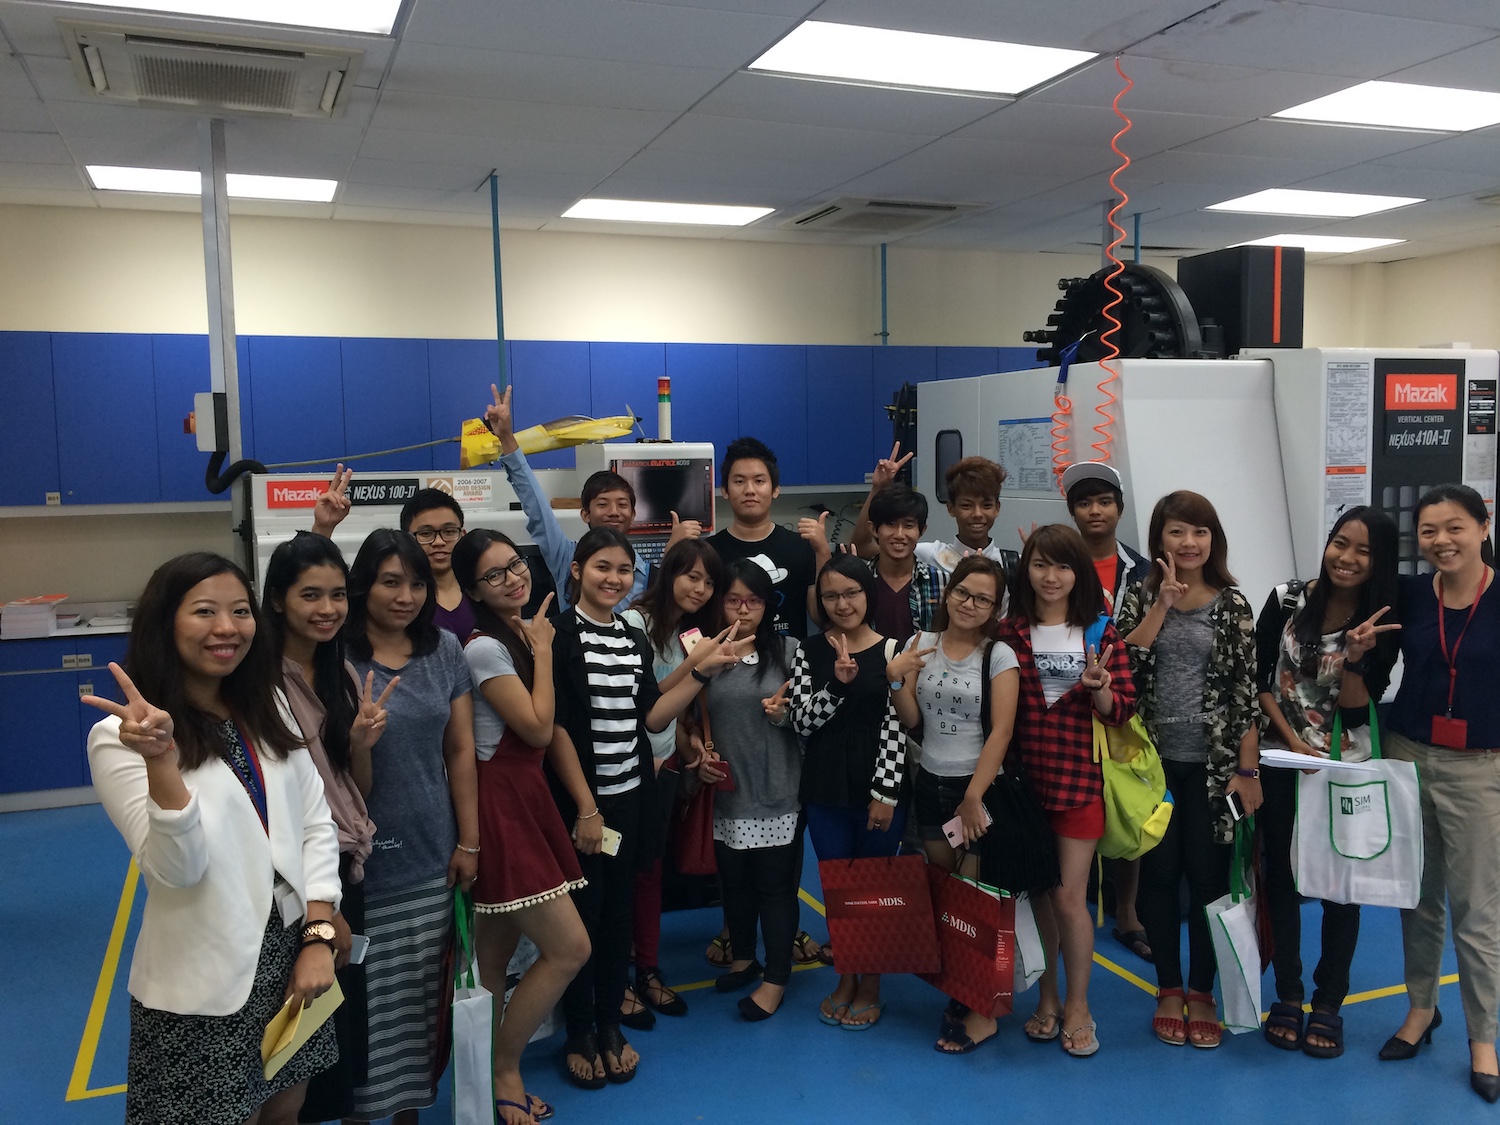 MDIS students posing for a picture in the engineering lab.